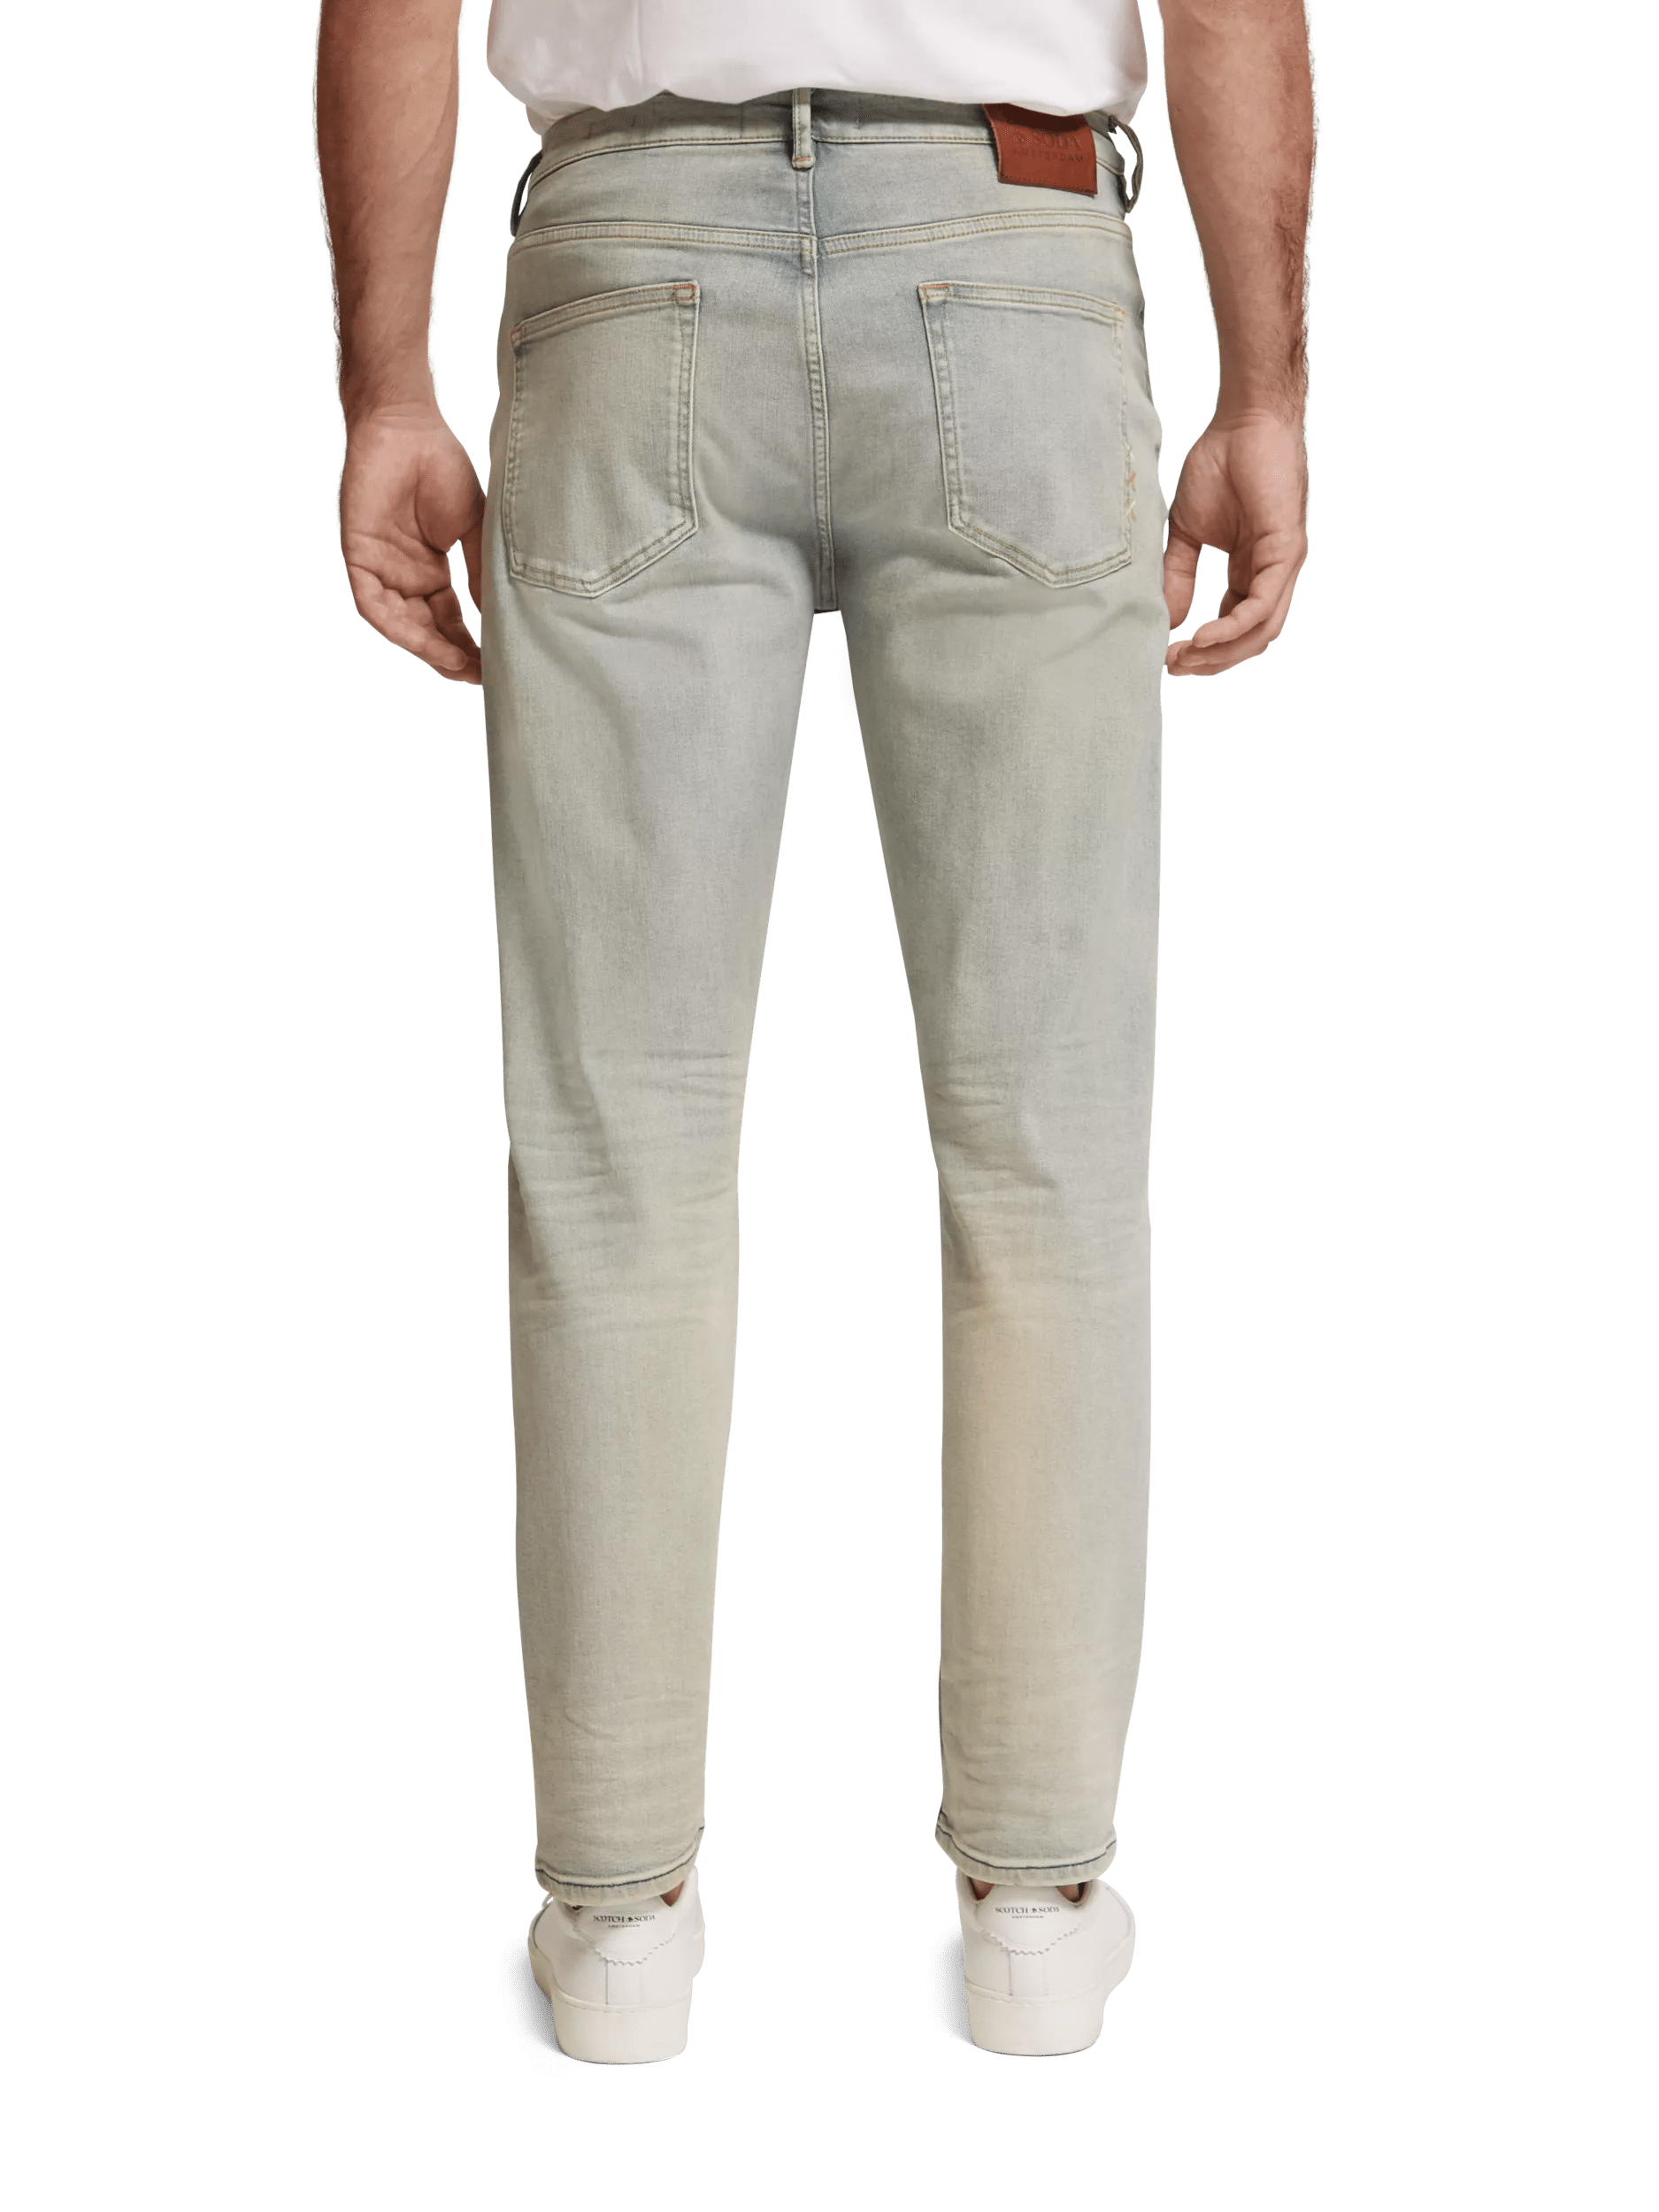 Scotch & Soda The Drop regular tapered-fit jeans FIT-BCK